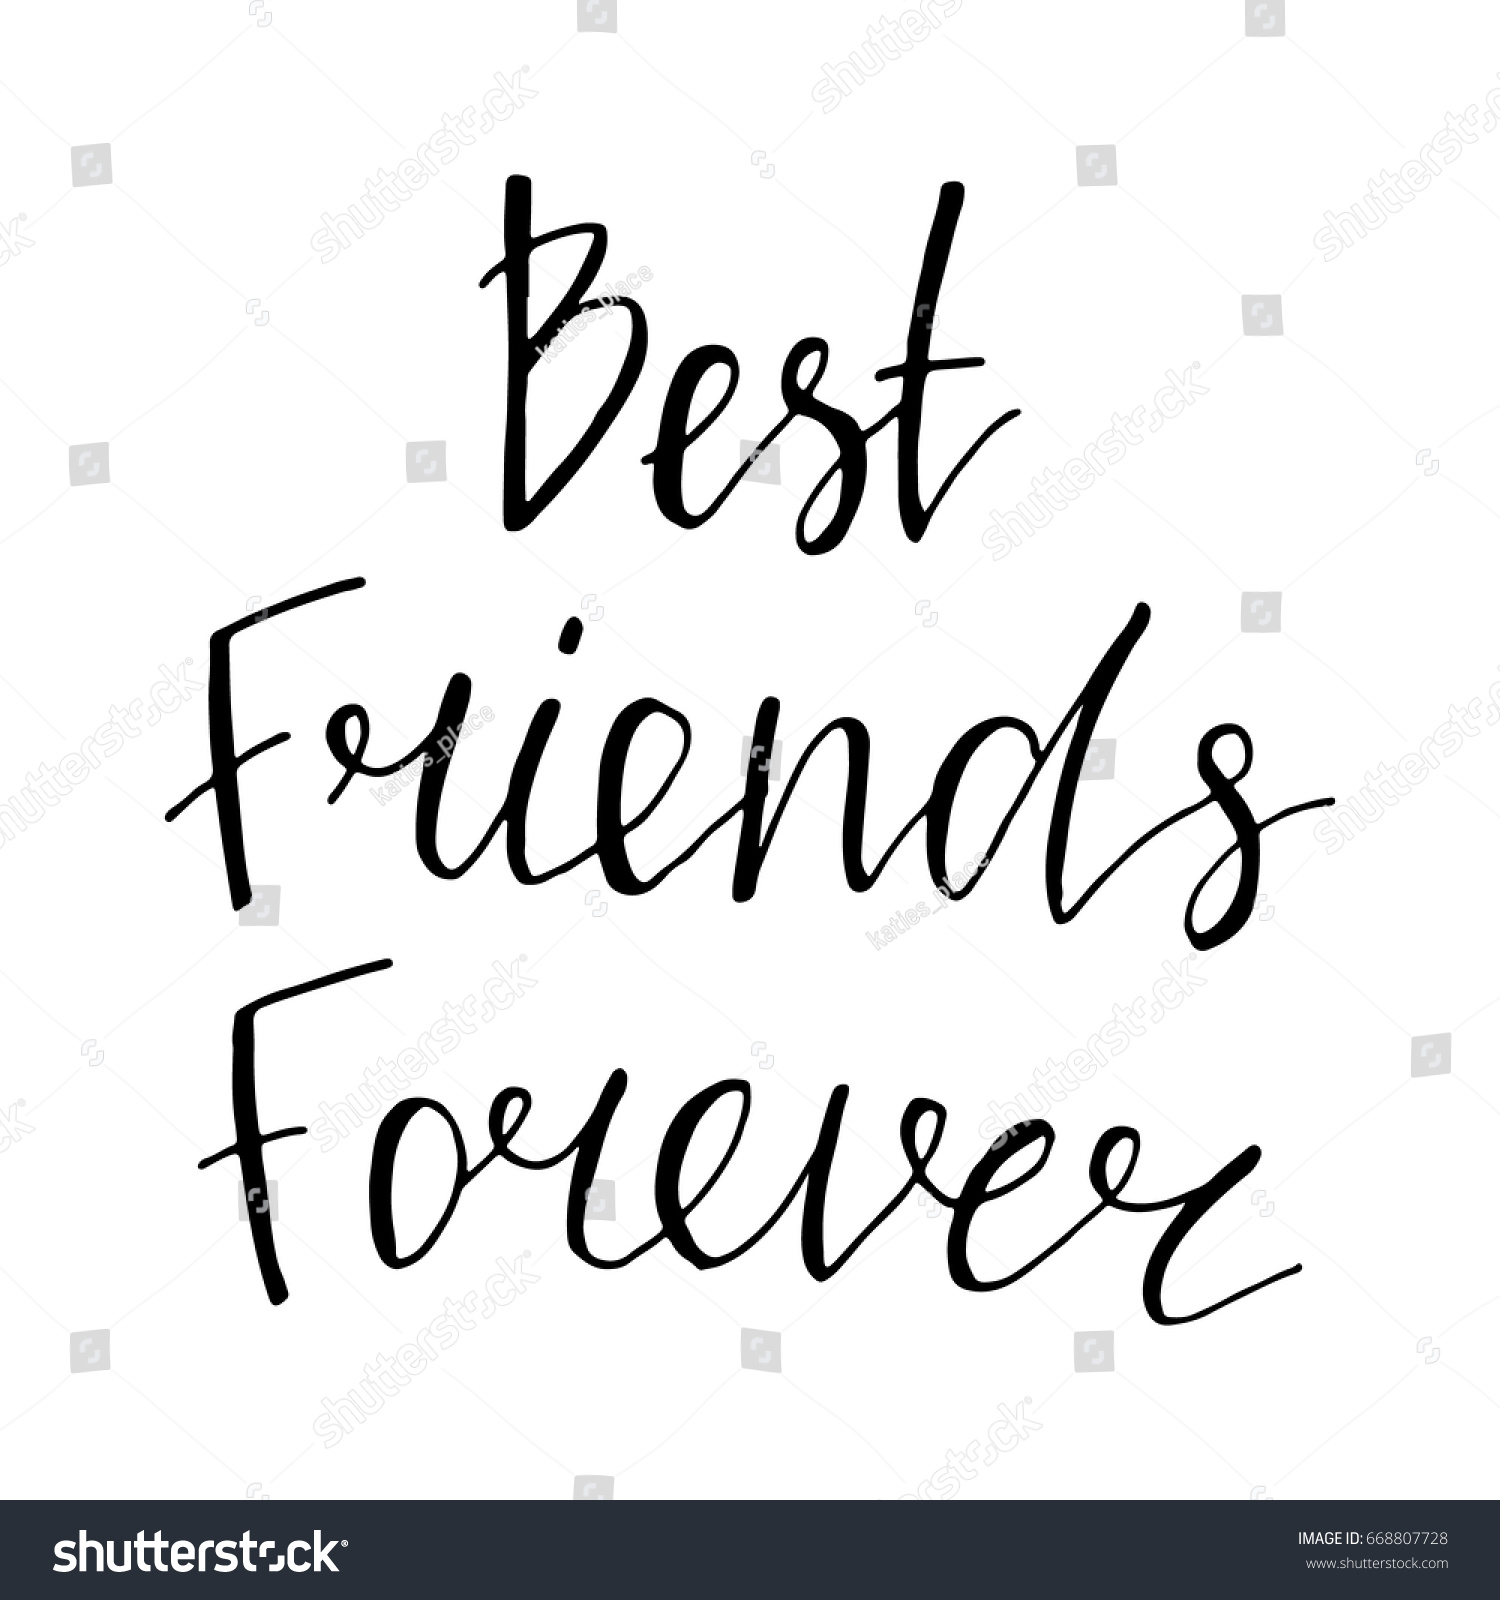 Best Friends Forever Hand Drawn Vector Stock Vector 668807728 ...